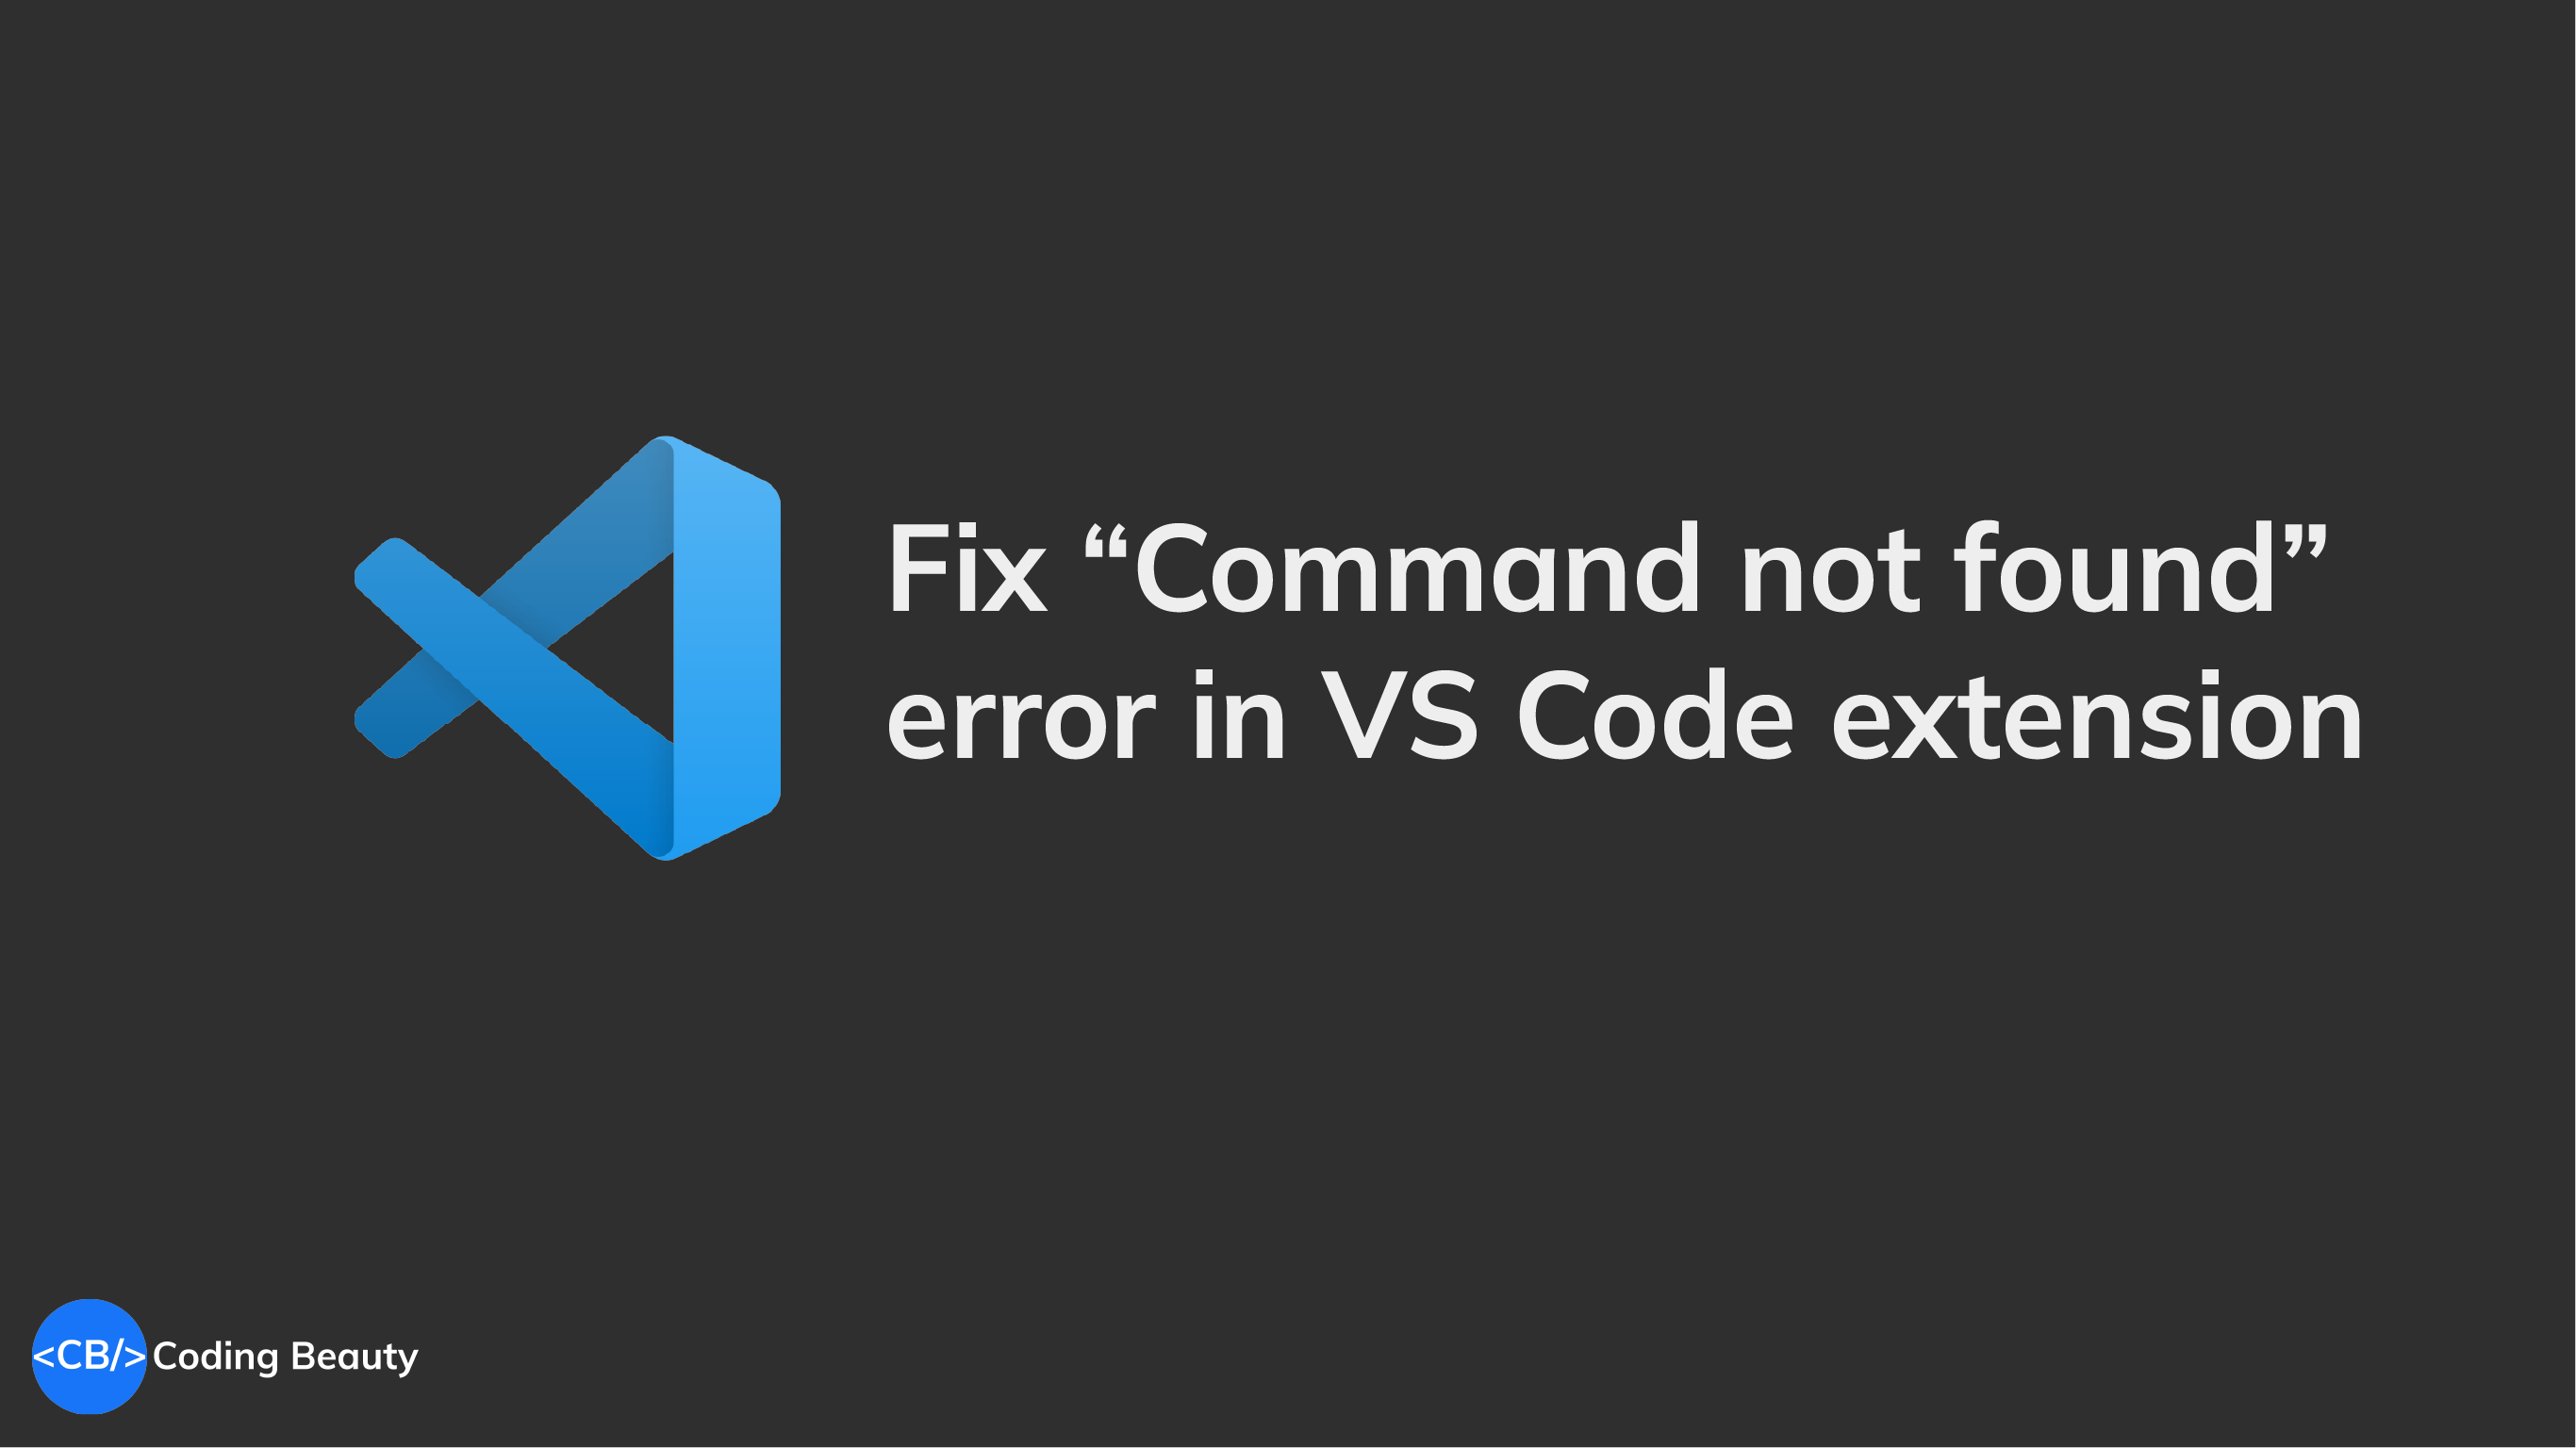 How to easily fix the "Command not found" error in VS Code